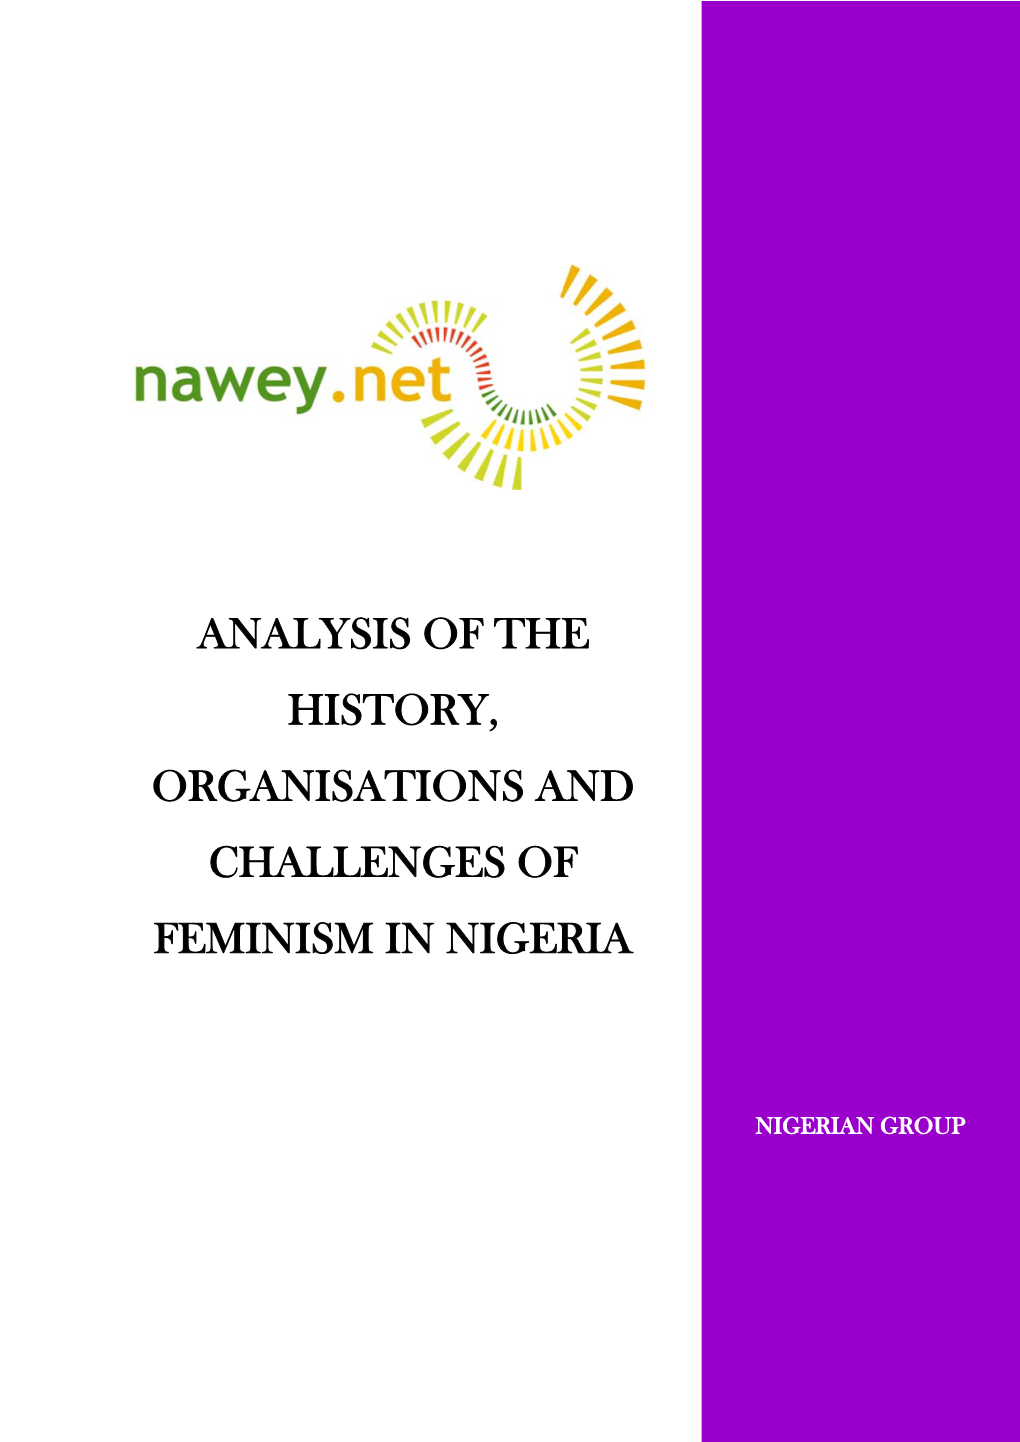 Analysis of the History, Organisations and Challenges of Feminism in Nigeria